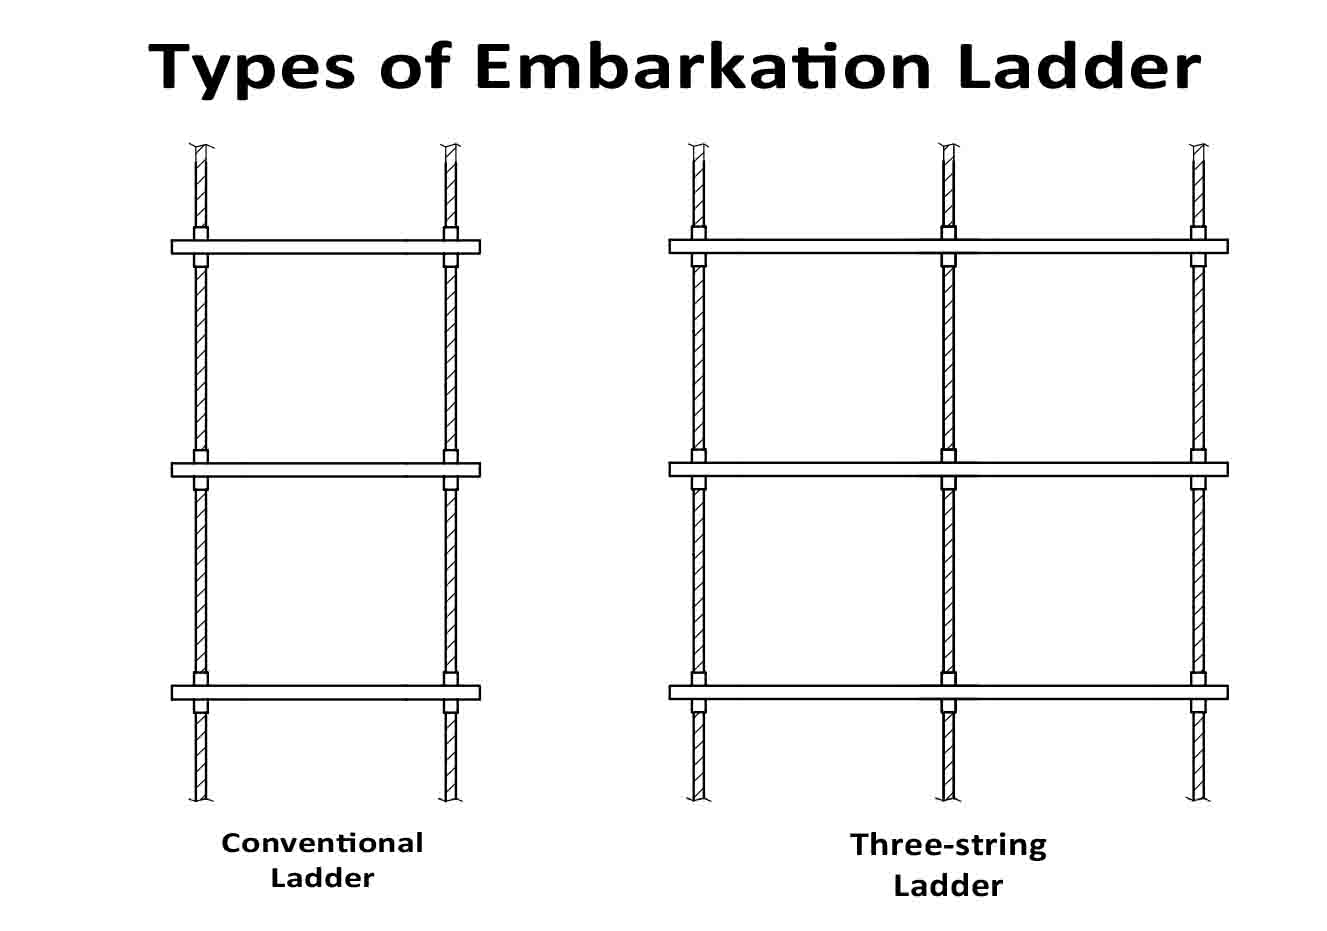 Two Types of Embarkation ladder - A two-string conventional ladder and a three-string ladder.